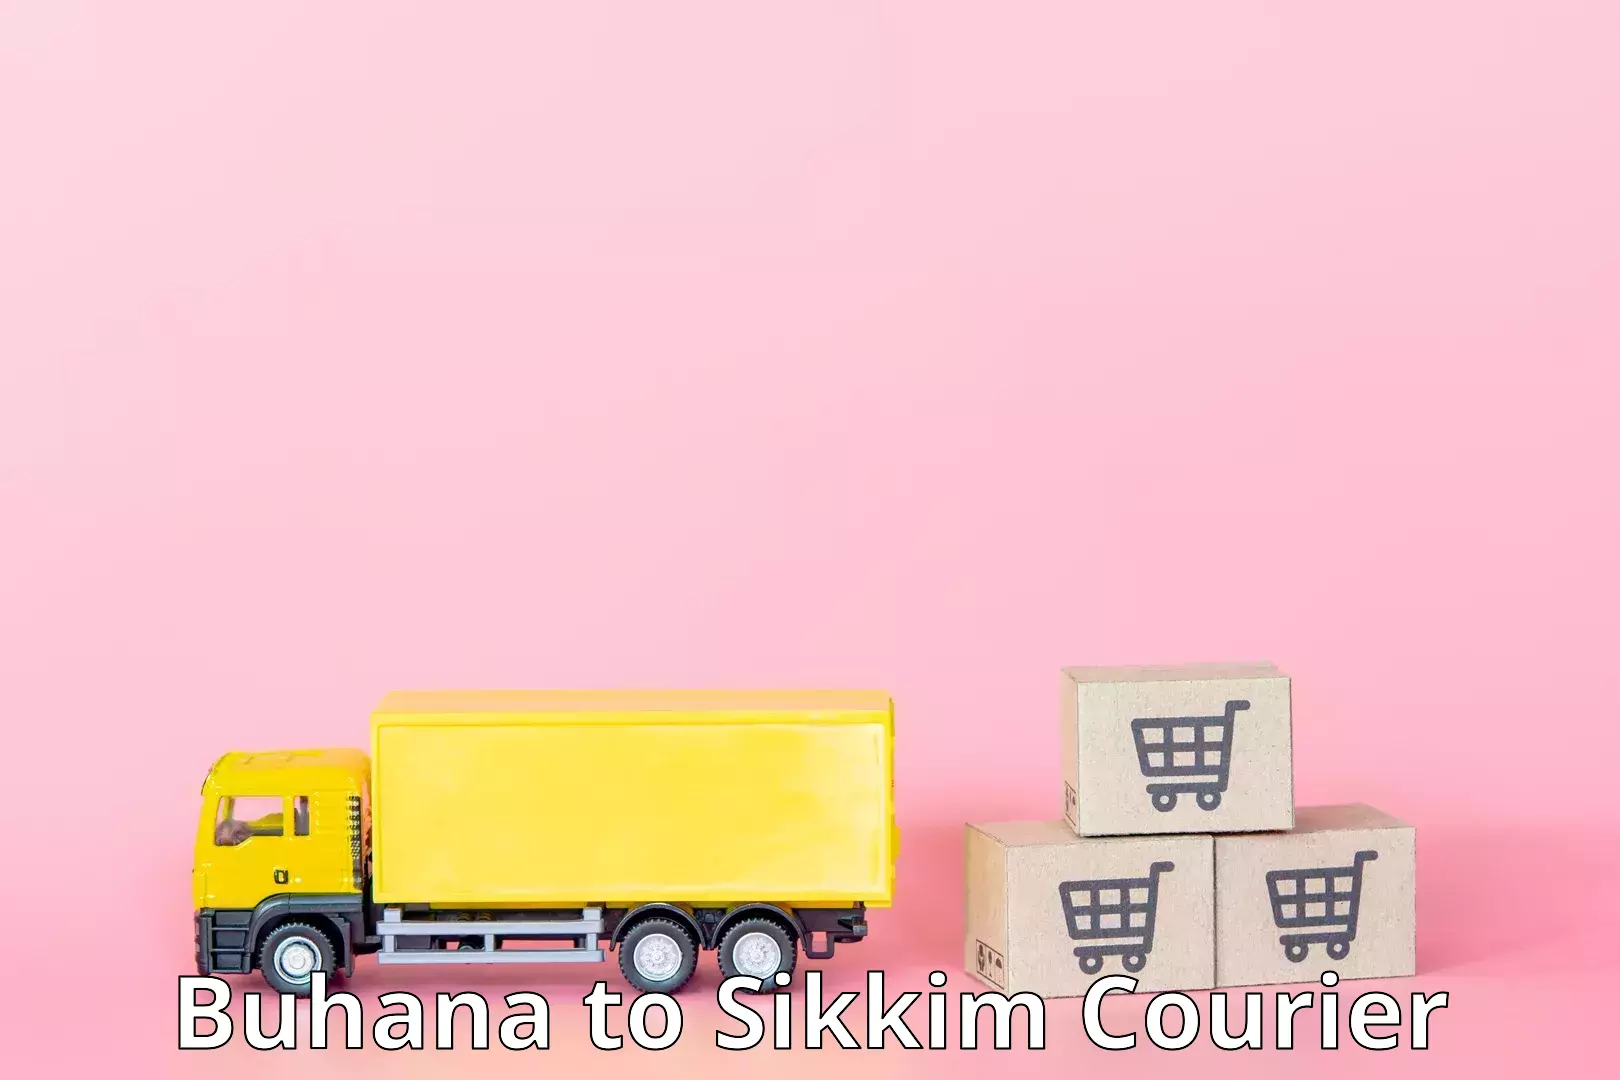 Multi-city courier Buhana to North Sikkim